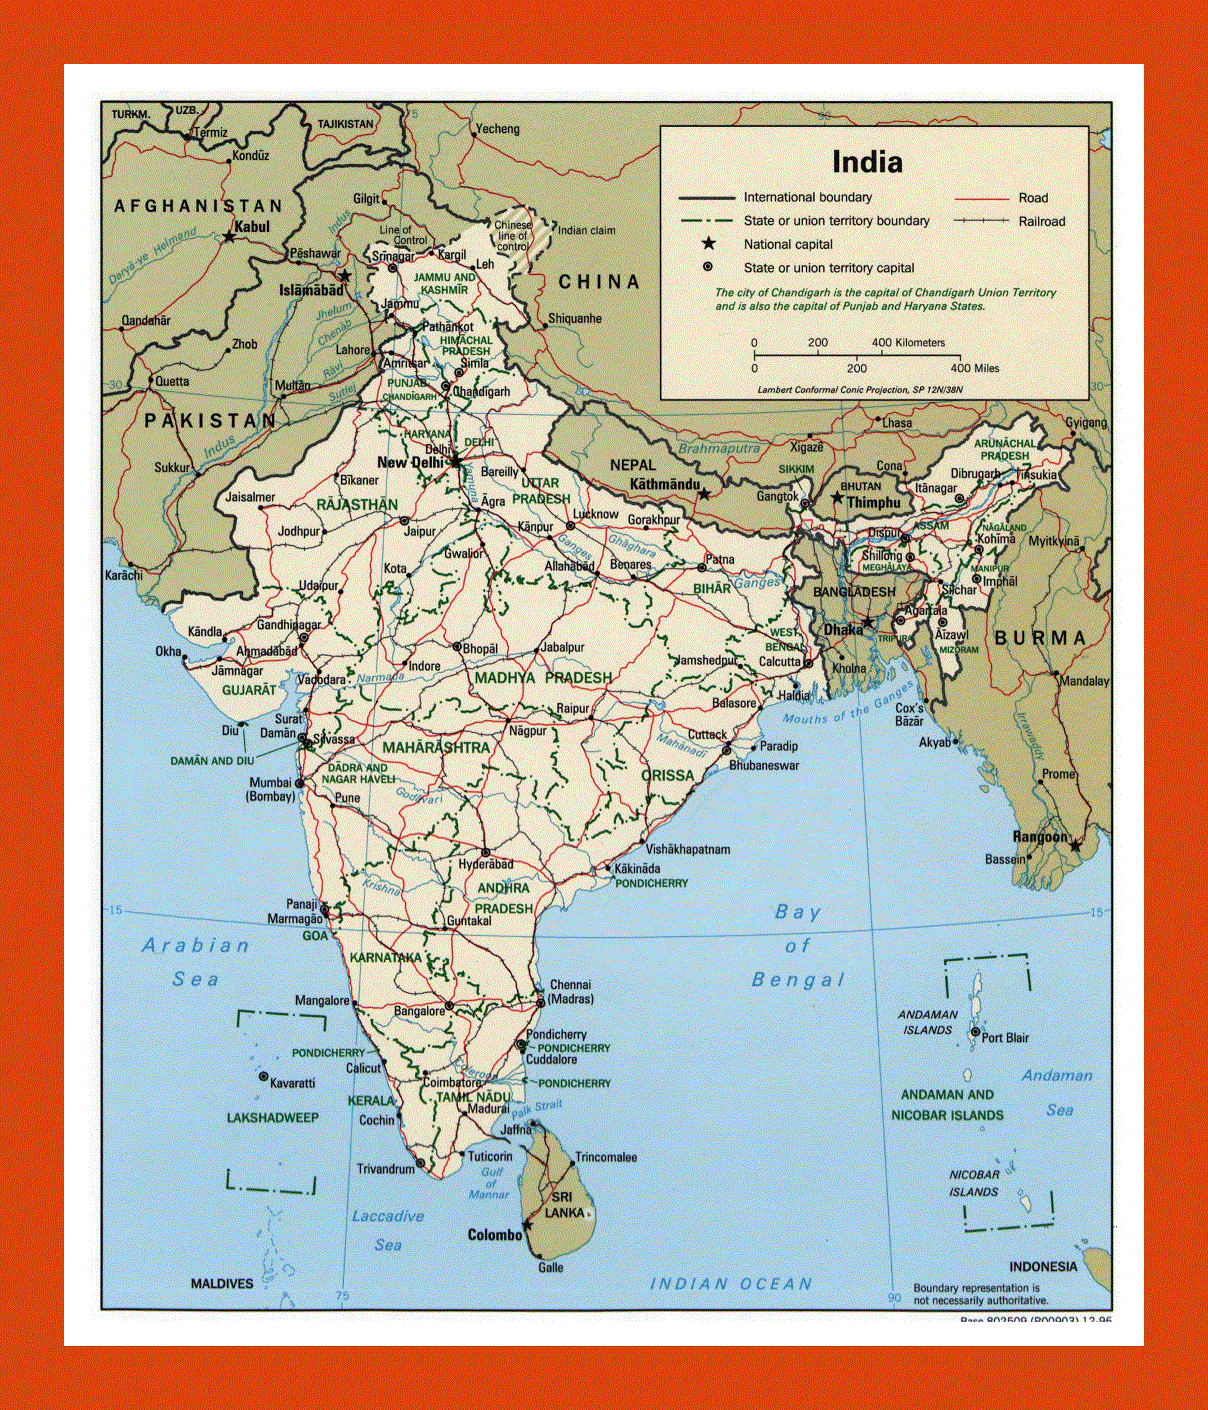 Political and administrative map of India - 1996